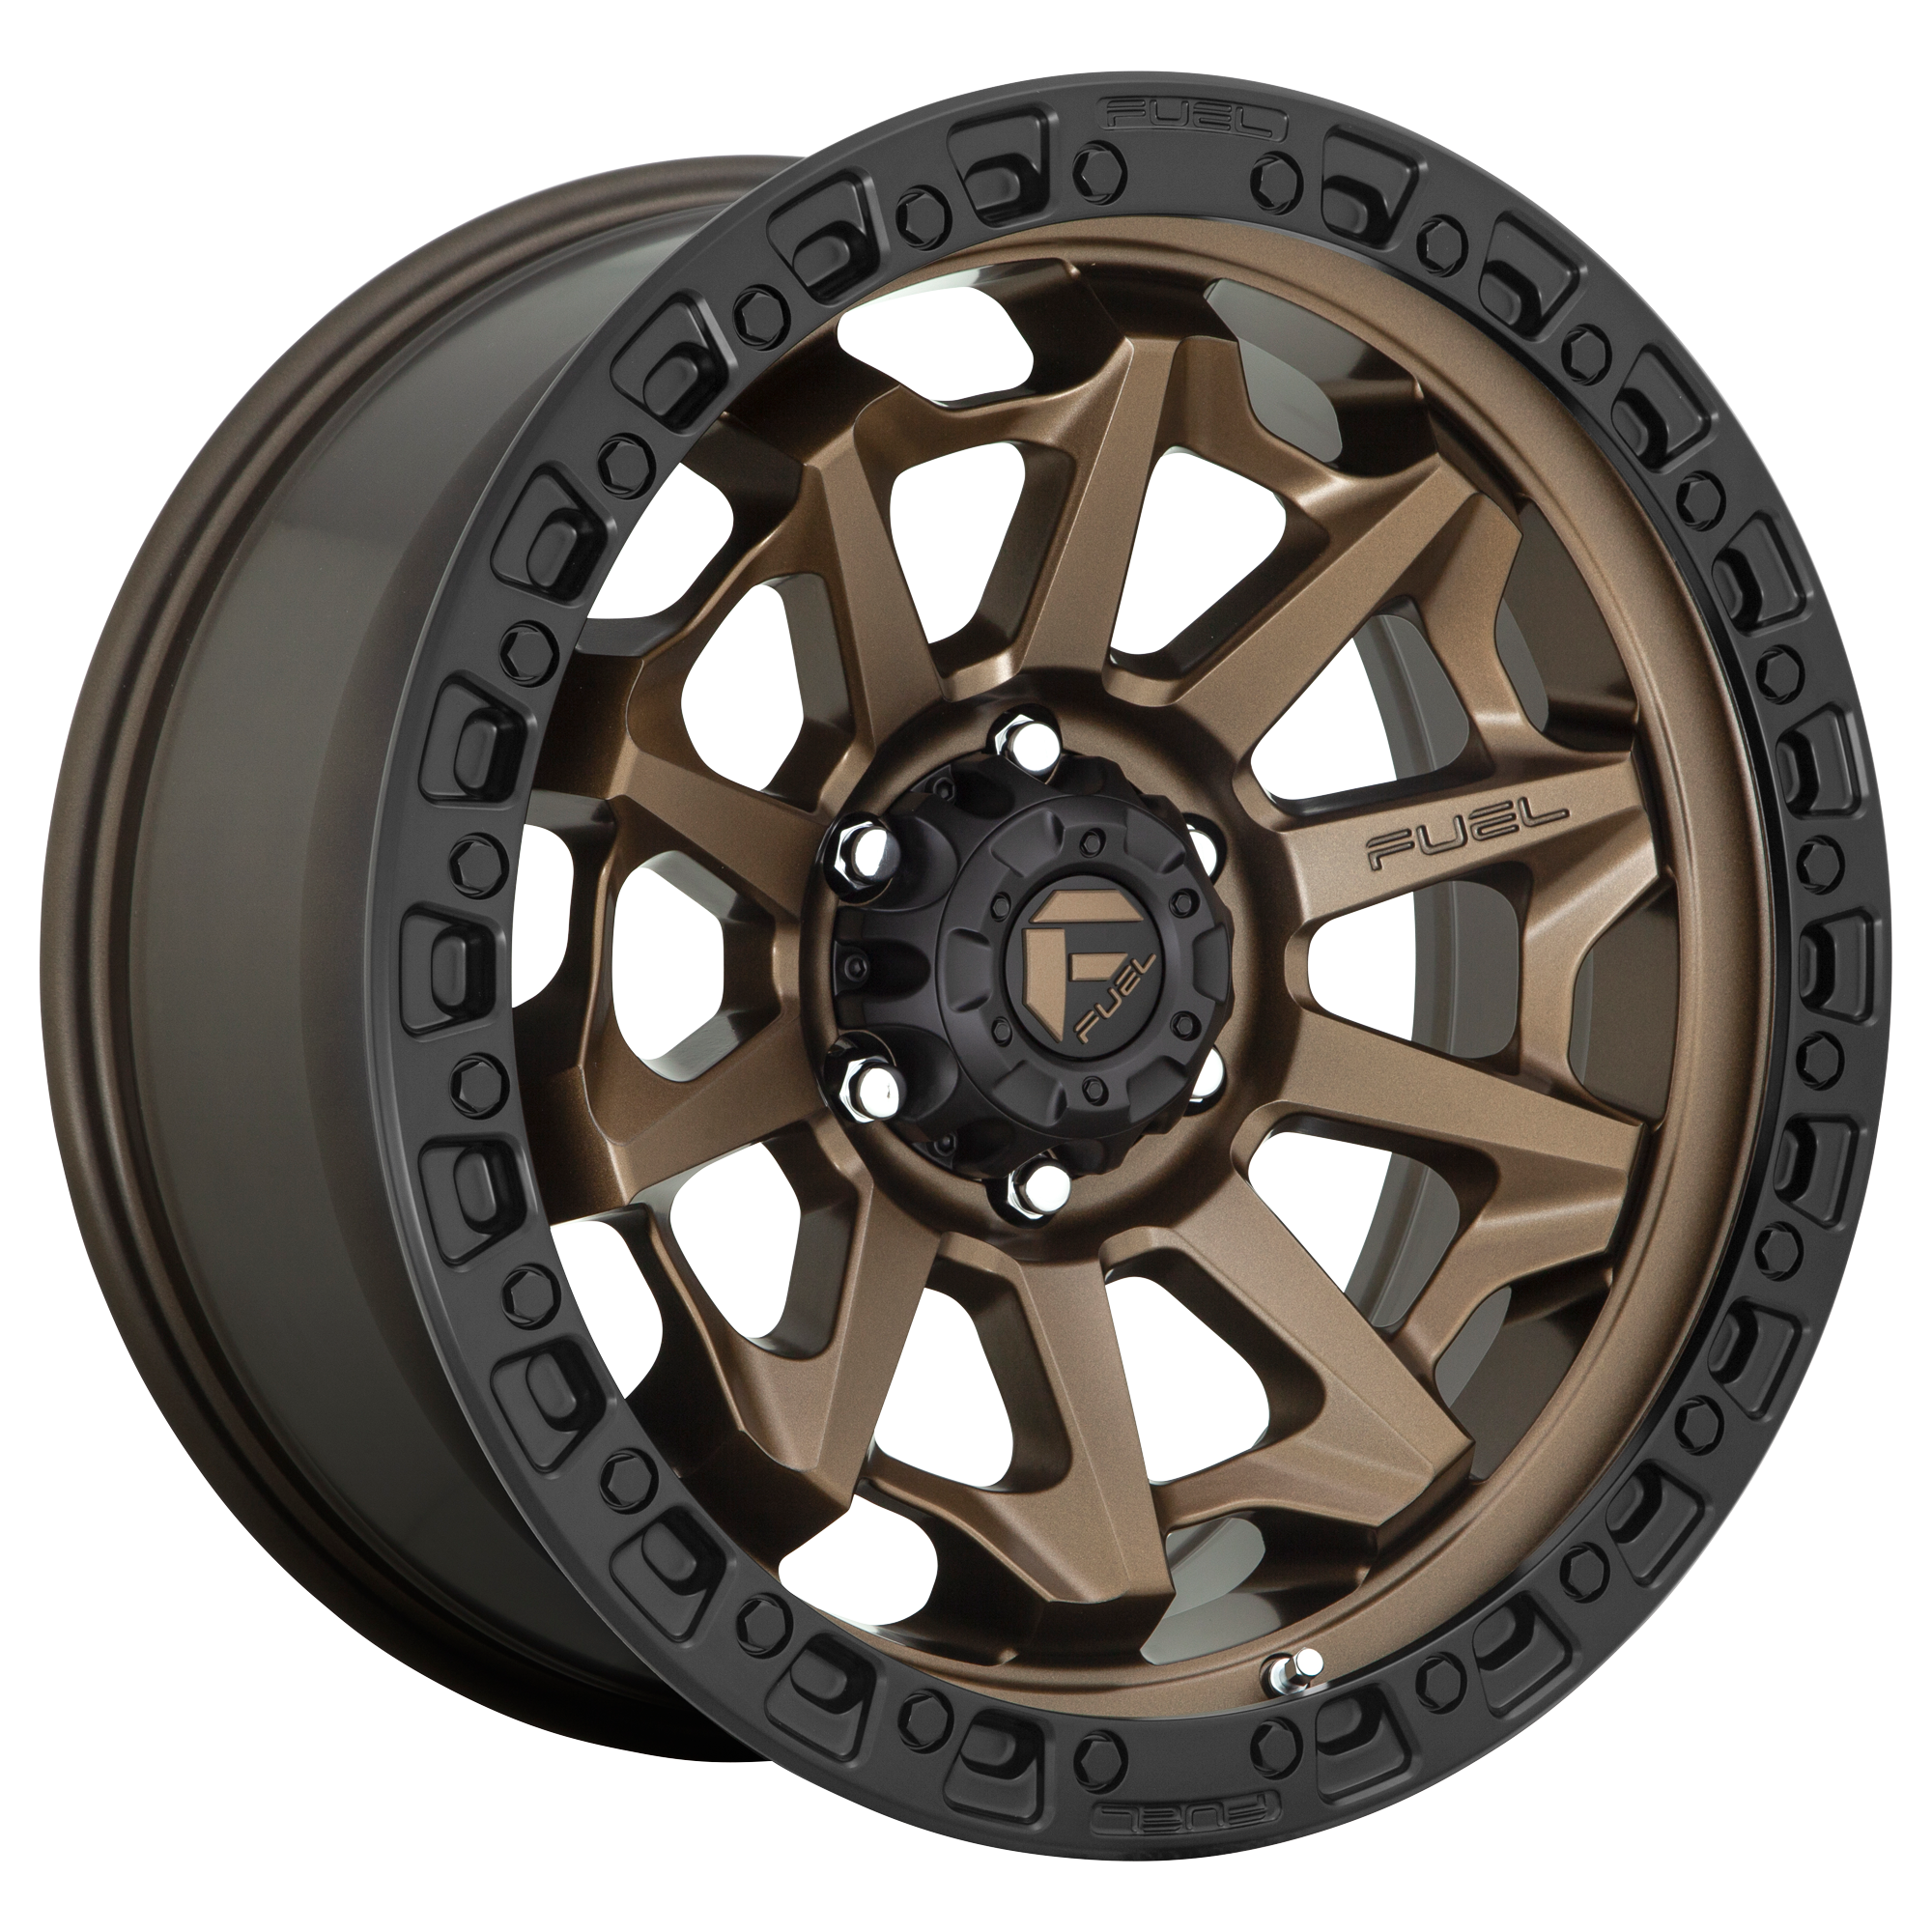 COVERT 20x10 6x135.00 MATTE BRONZE BLACK BEAD RING (-18 mm) - Tires and Engine Performance